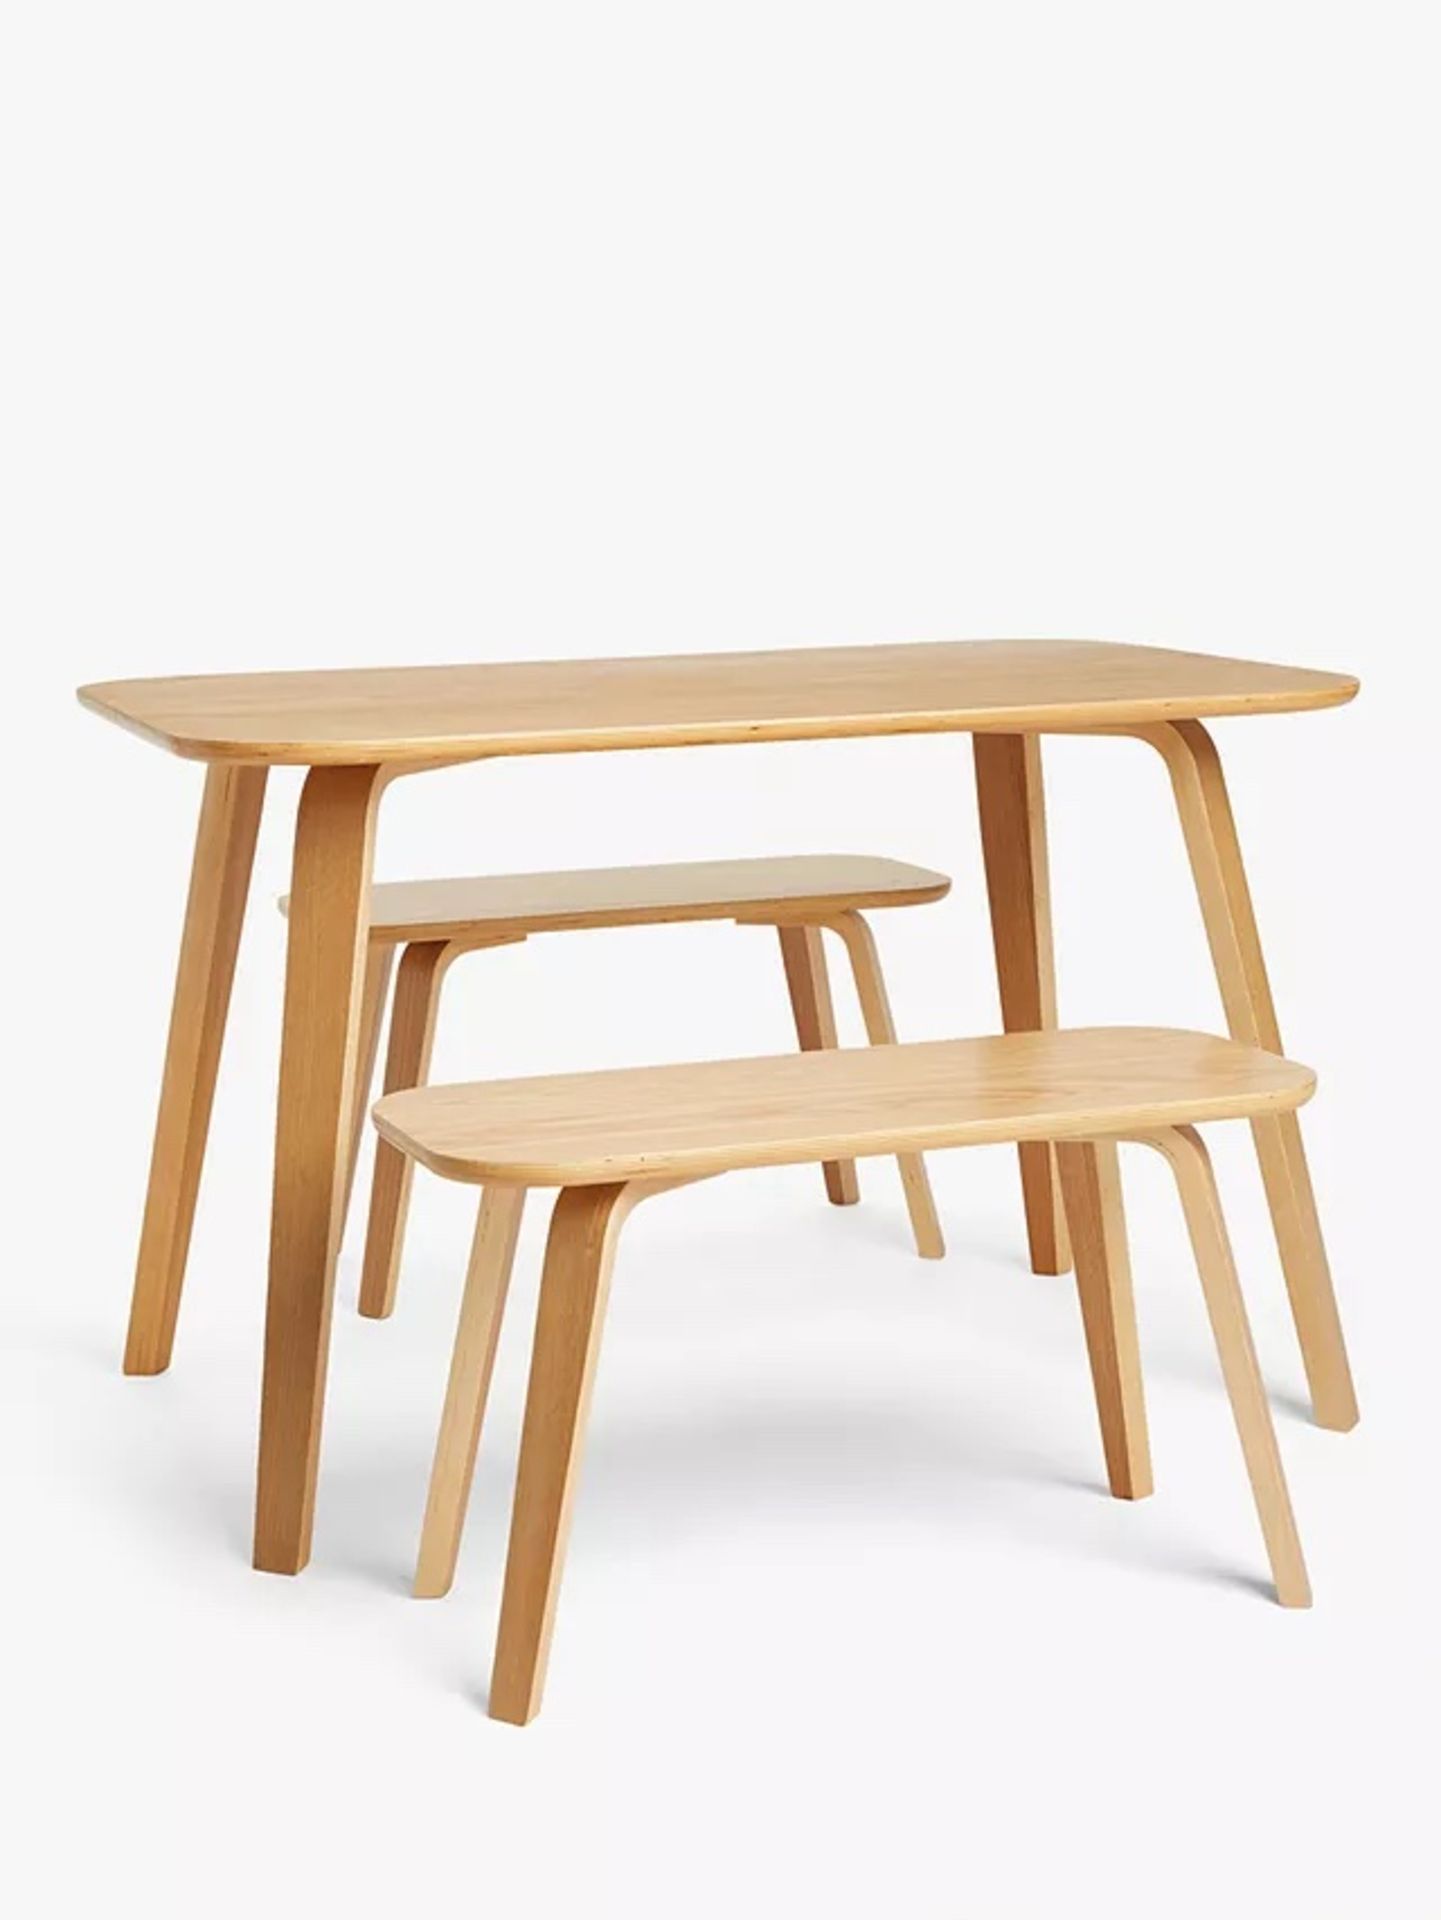 P002982108 John Lewis & Partners Anton 4 Seater Dining Table and 2 Seater Benches, Oak